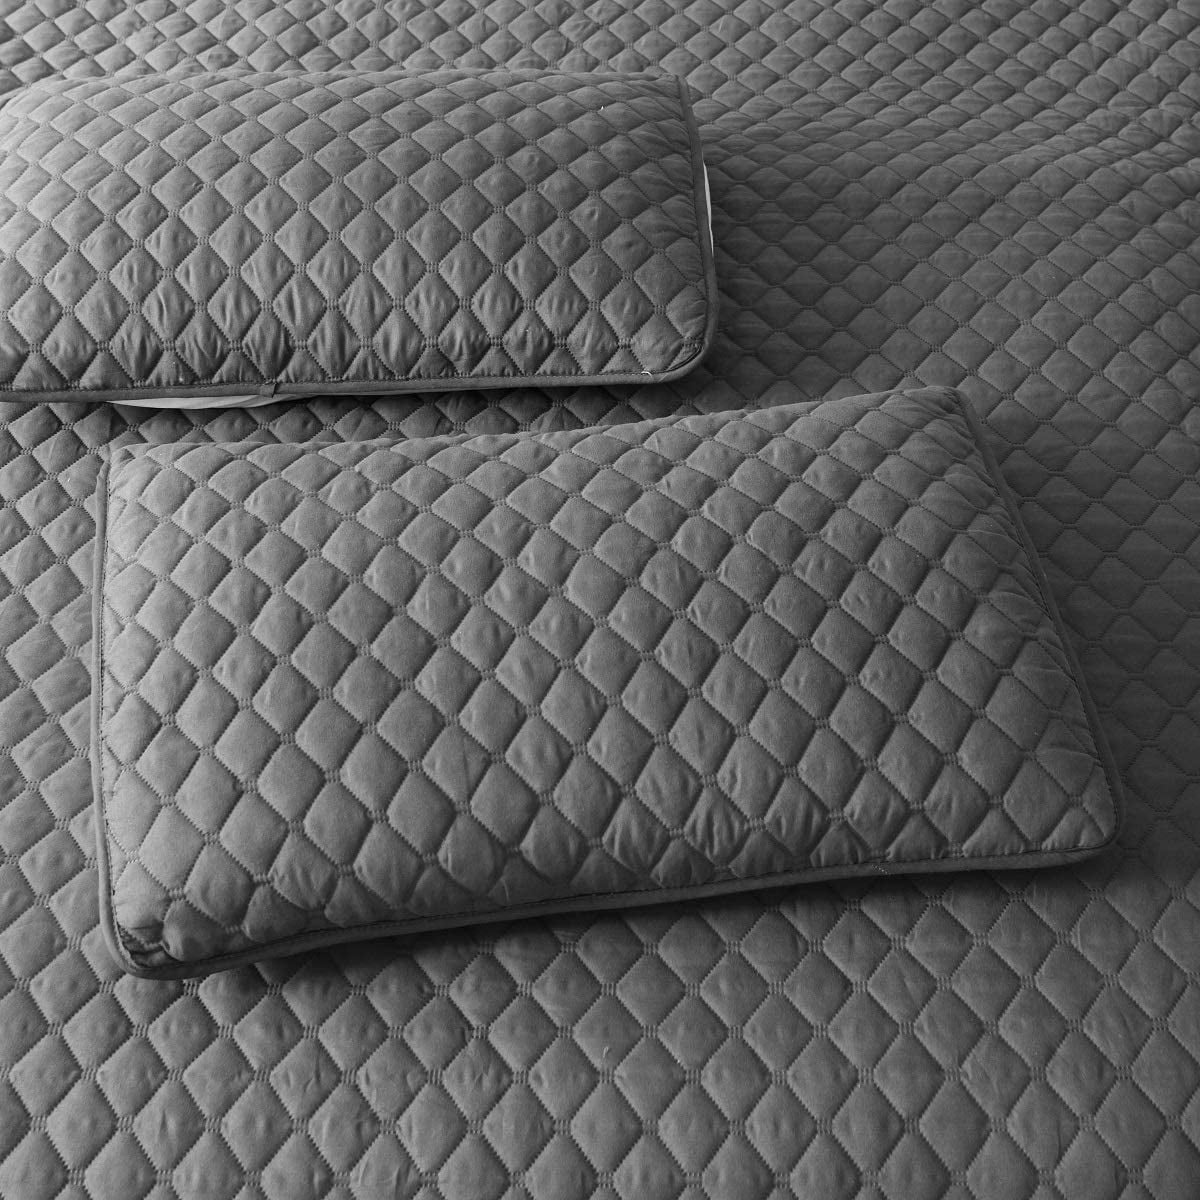 Exclusivo Mezcla Ultrasonic Reversible 3-Piece King Size Quilt Set with Pillow Shams, Lightweight Bedspread/Coverlet/Bed Cover - (Grey, 92"x104")